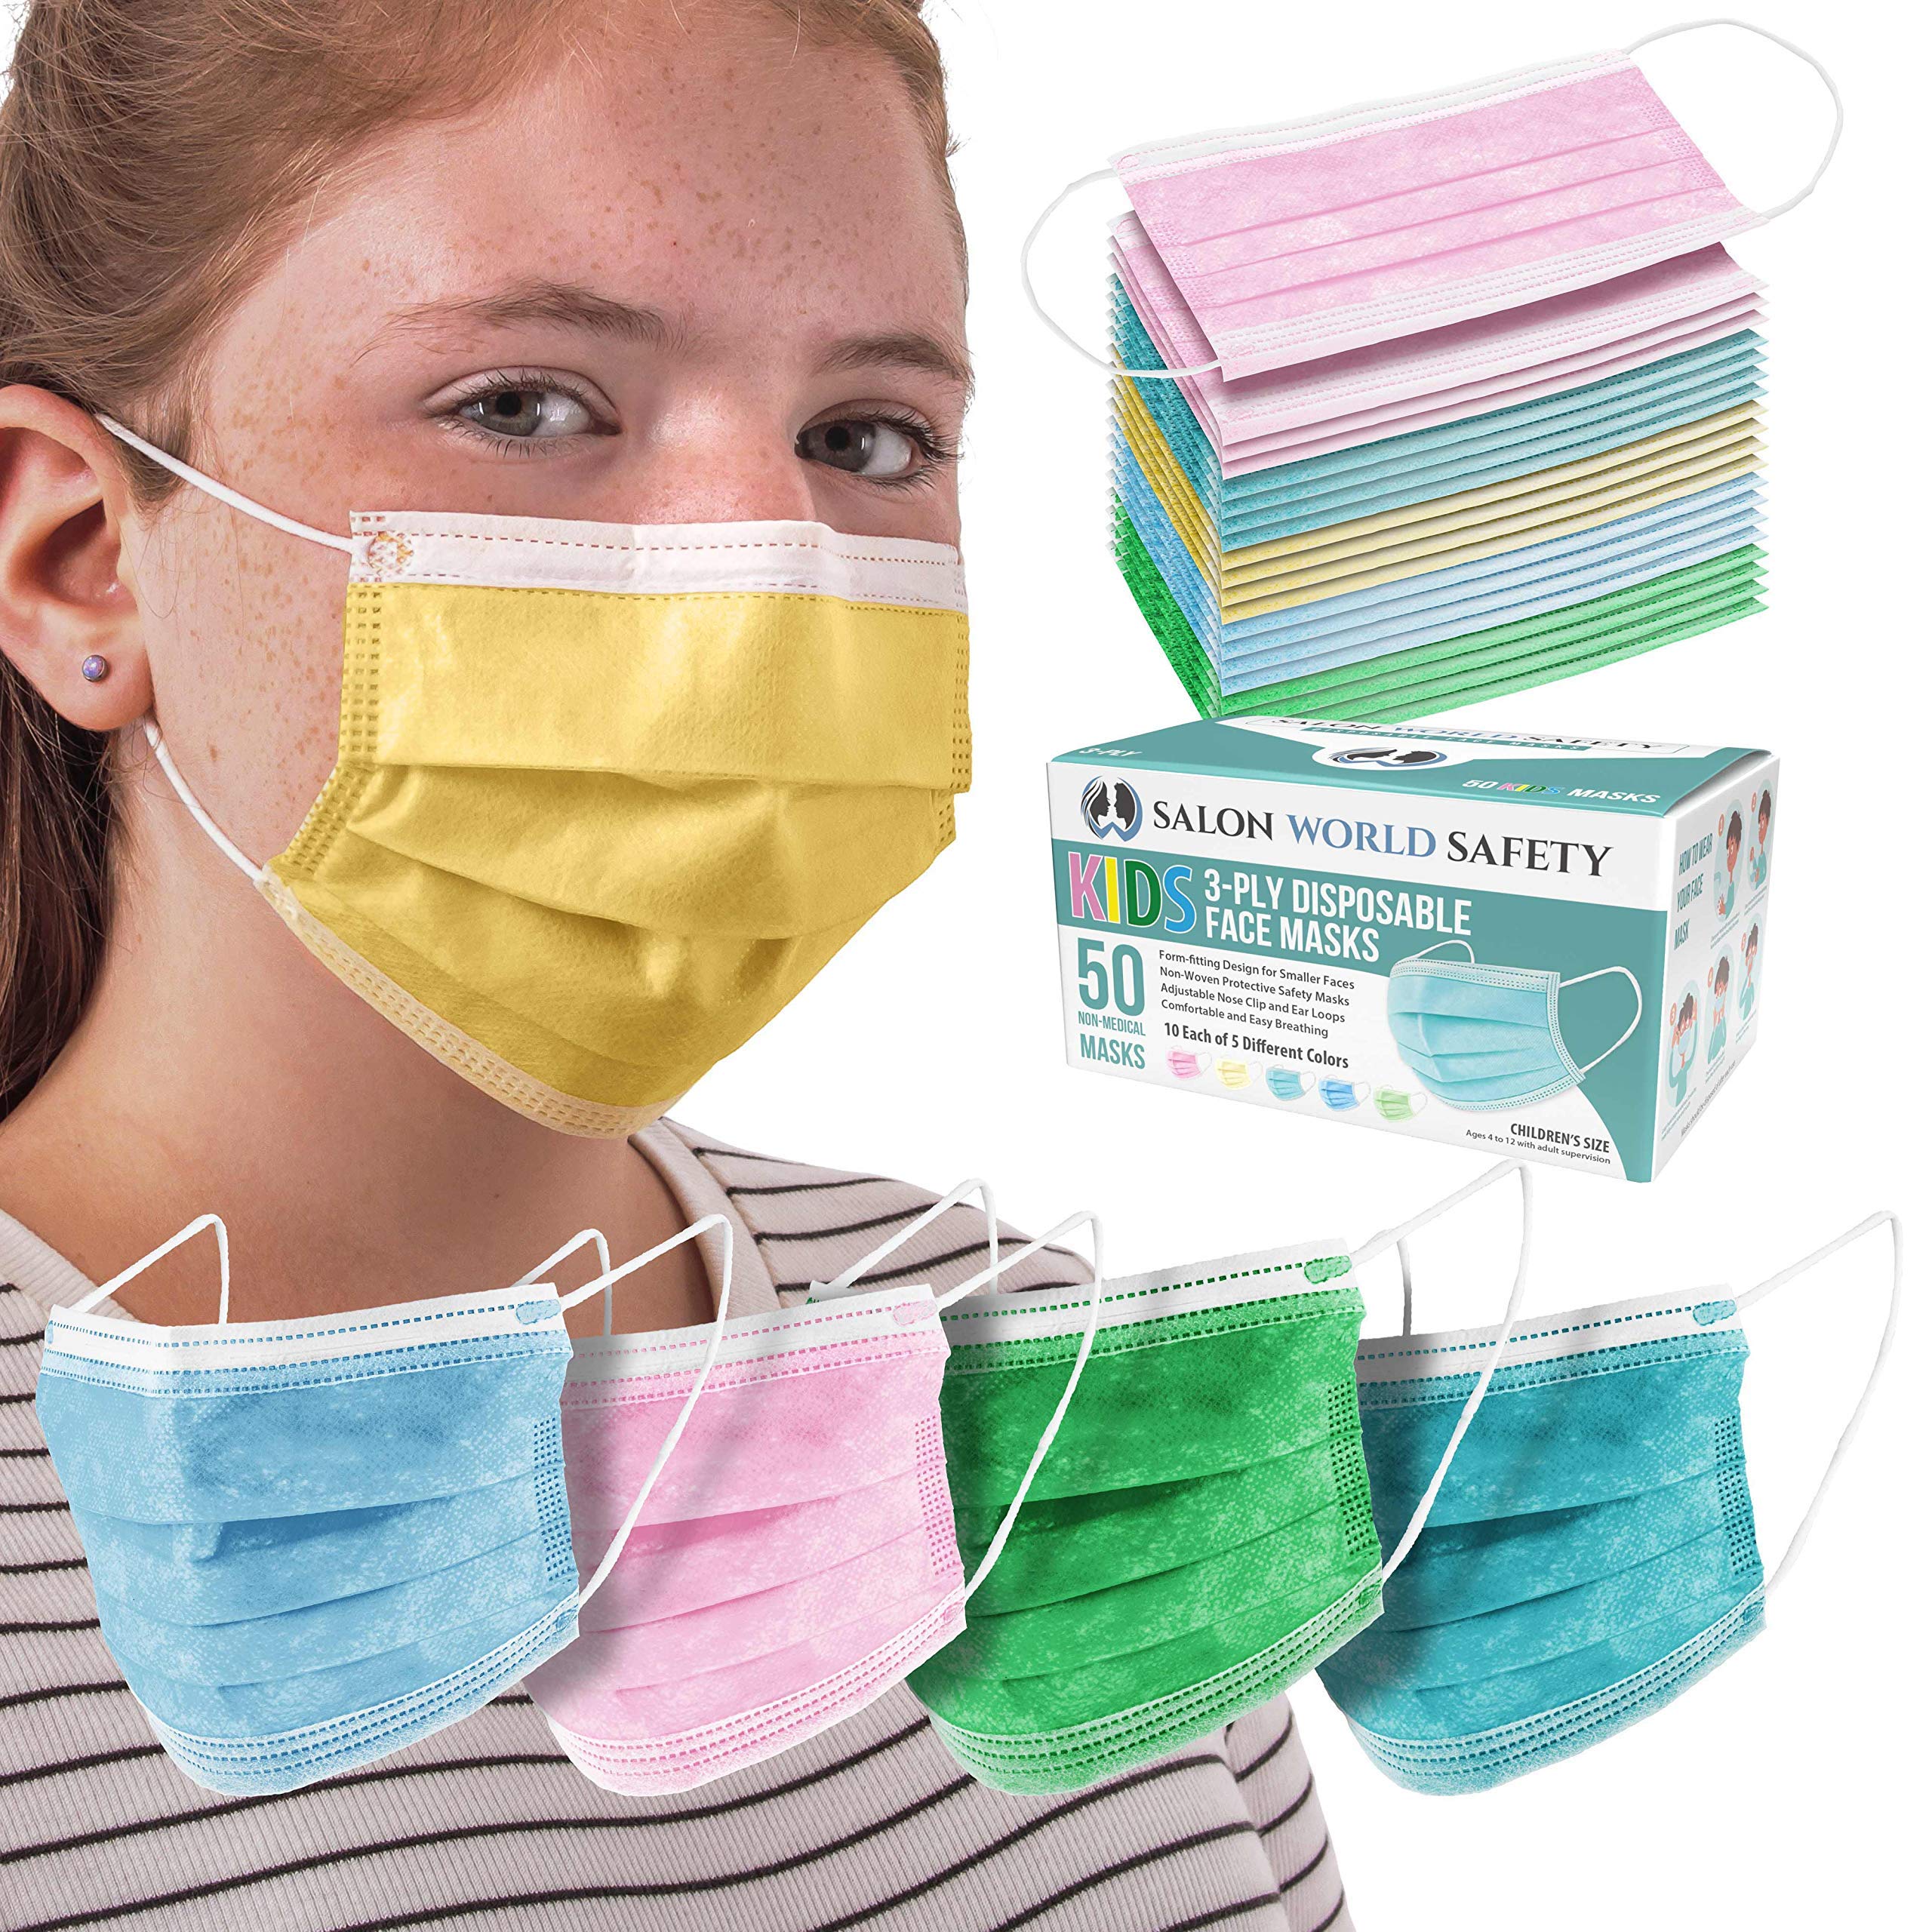 TCP Global Salon World Safety - Kids Face Masks 3-Ply Protective PPE (5 Colors) Disposable Children's Size